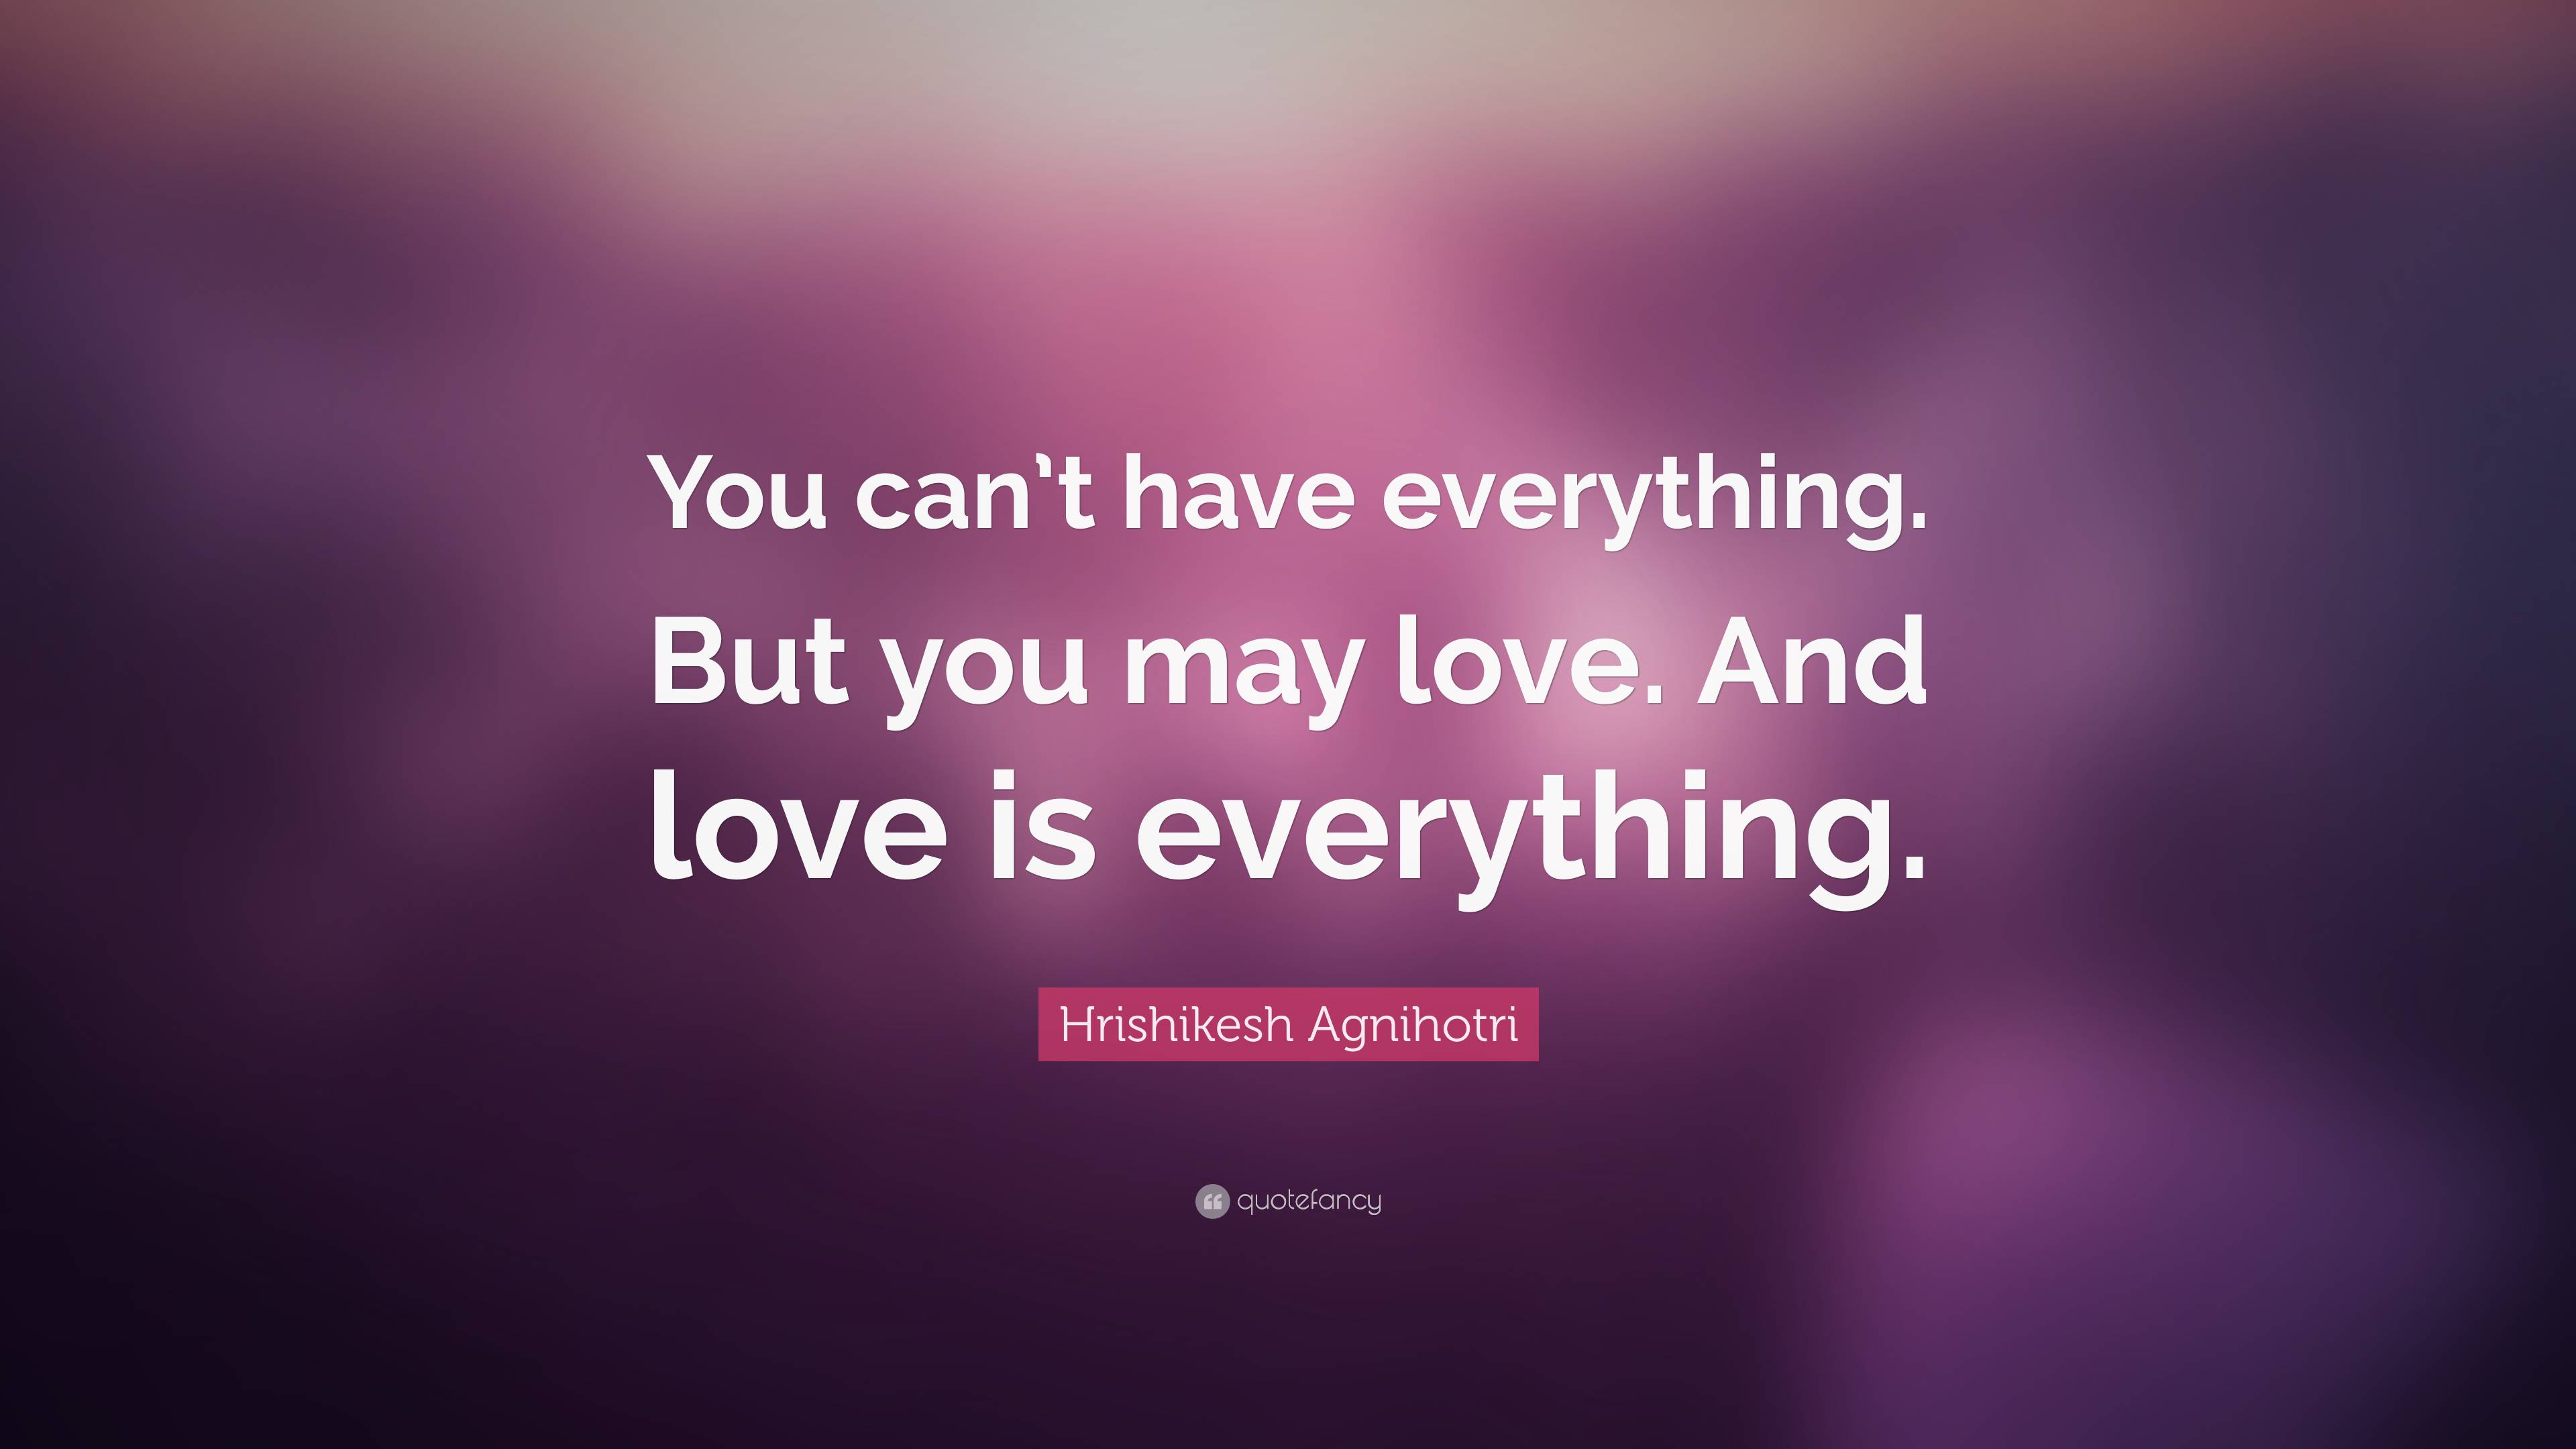 Hrishikesh Agnihotri Quote: “You can’t have everything. But you may ...